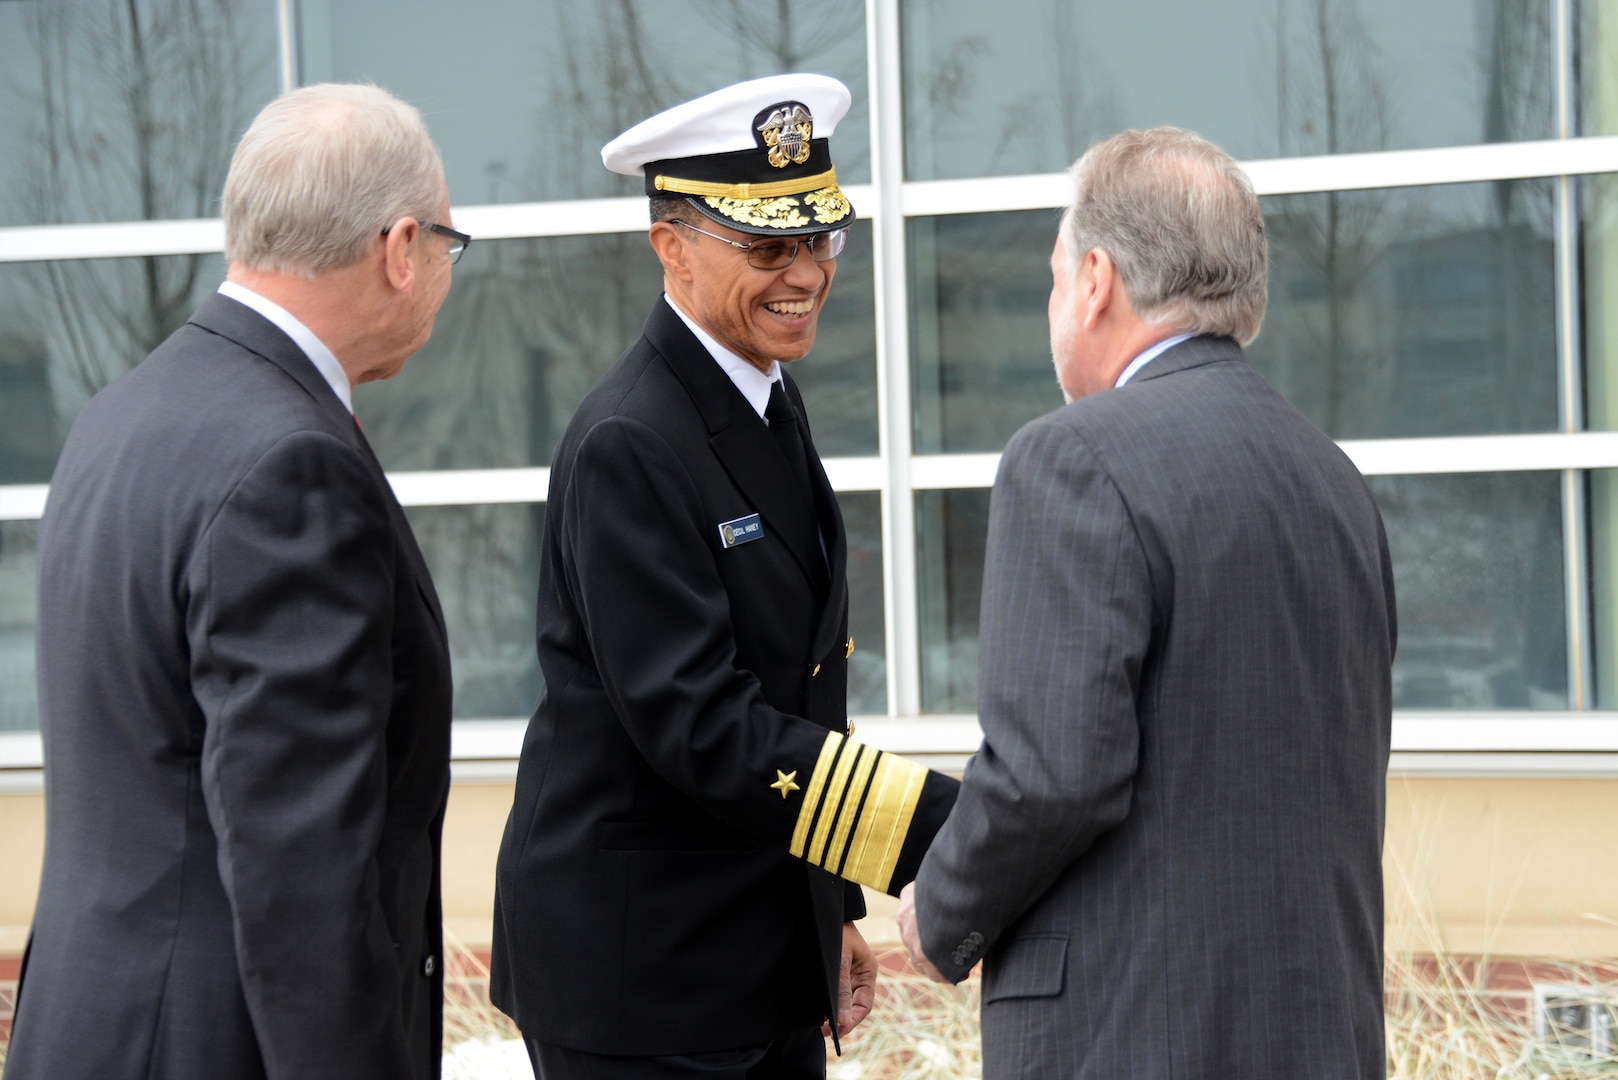 U.S. Navy Adm. Cecil D. Haney (center), U.S. Strategic Command (USSTRATCOM) commander, speaks to Dr. John Christensen (left), University of Nebraska at Omaha (UNO) chancellor, and Dr. Louis Pol, Dean of UNO's College of Business Administration, during his arrival at the USSTRATCOM Leader Fellowship Program kick-off event at UNO's Mammel Hall, Omaha, Neb., Jan. 23, 2016. During the event, Haney and other senior leaders from the command joined University of Nebraska senior leaders and faculty in recognizing the 10 USSTRATCOM Fellows for their selection into the program. The 13-week course brings civilian employees together with national security and defense experts from the University of Nebraska for a classroom-based, hands-on learning opportunity that will provide graduate-level leadership development. UNO, the University of Nebraska and USSTRATCOM launched the initiative in March 2014 under the University of Nebraska's National Strategic Research Institute (NSRI), one of only 13 Department of Defense-sponsored University Affiliated Research Centers (UARCs) in the nation. One of nine DoD unified combatant commands, USSTRATCOM has global strategic missions, assigned through the Unified Command Plan, which include strategic deterrence; space operations; cyberspace operations; joint electronic warfare; global strike; missile defense; intelligence, surveillance and reconnaissance; combating weapons of mass destruction; and analysis and targeting. (USSTRATCOM photo by U.S. Air Force Staff Sgt. Jonathan Lovelady)